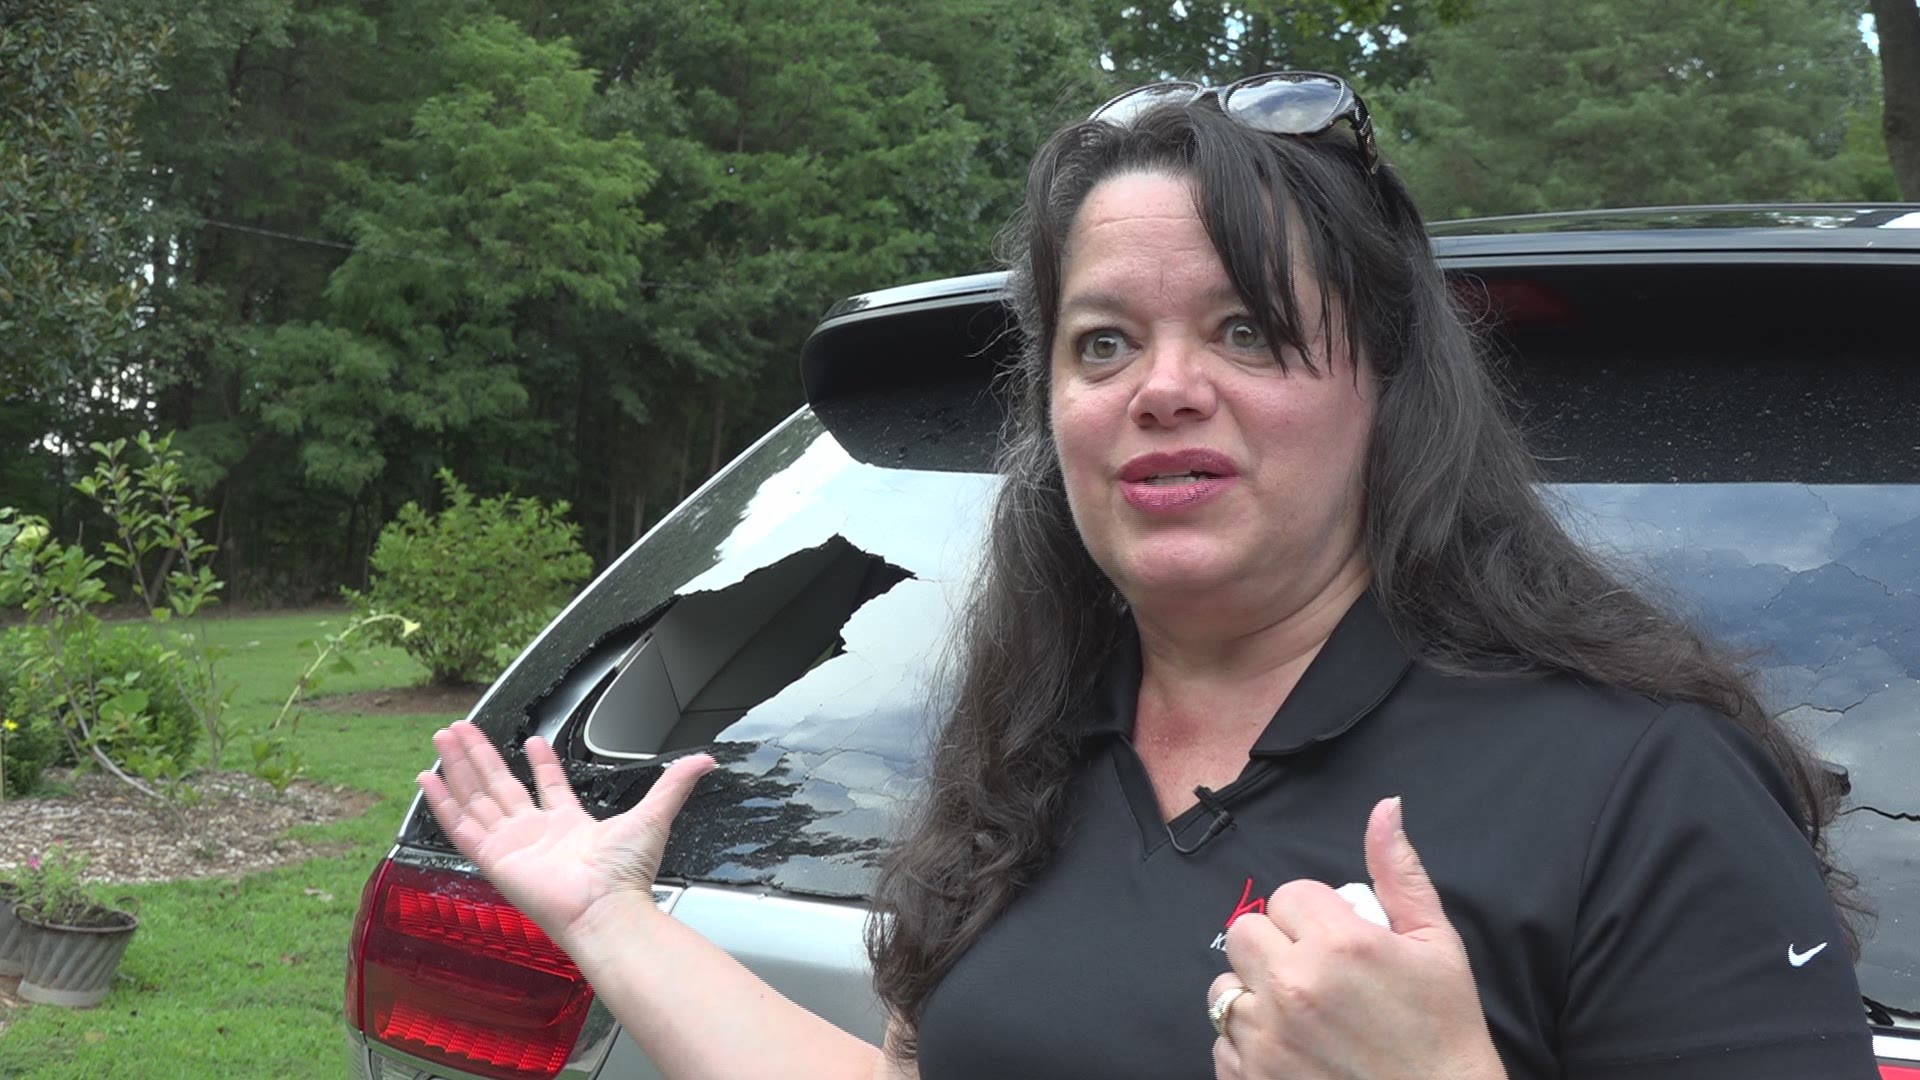 Angela Safrit said she was driving her Lincoln MKX SUV on Cotswold Ave in Greensboro Thursday afternoon when the frightening episode occurred.